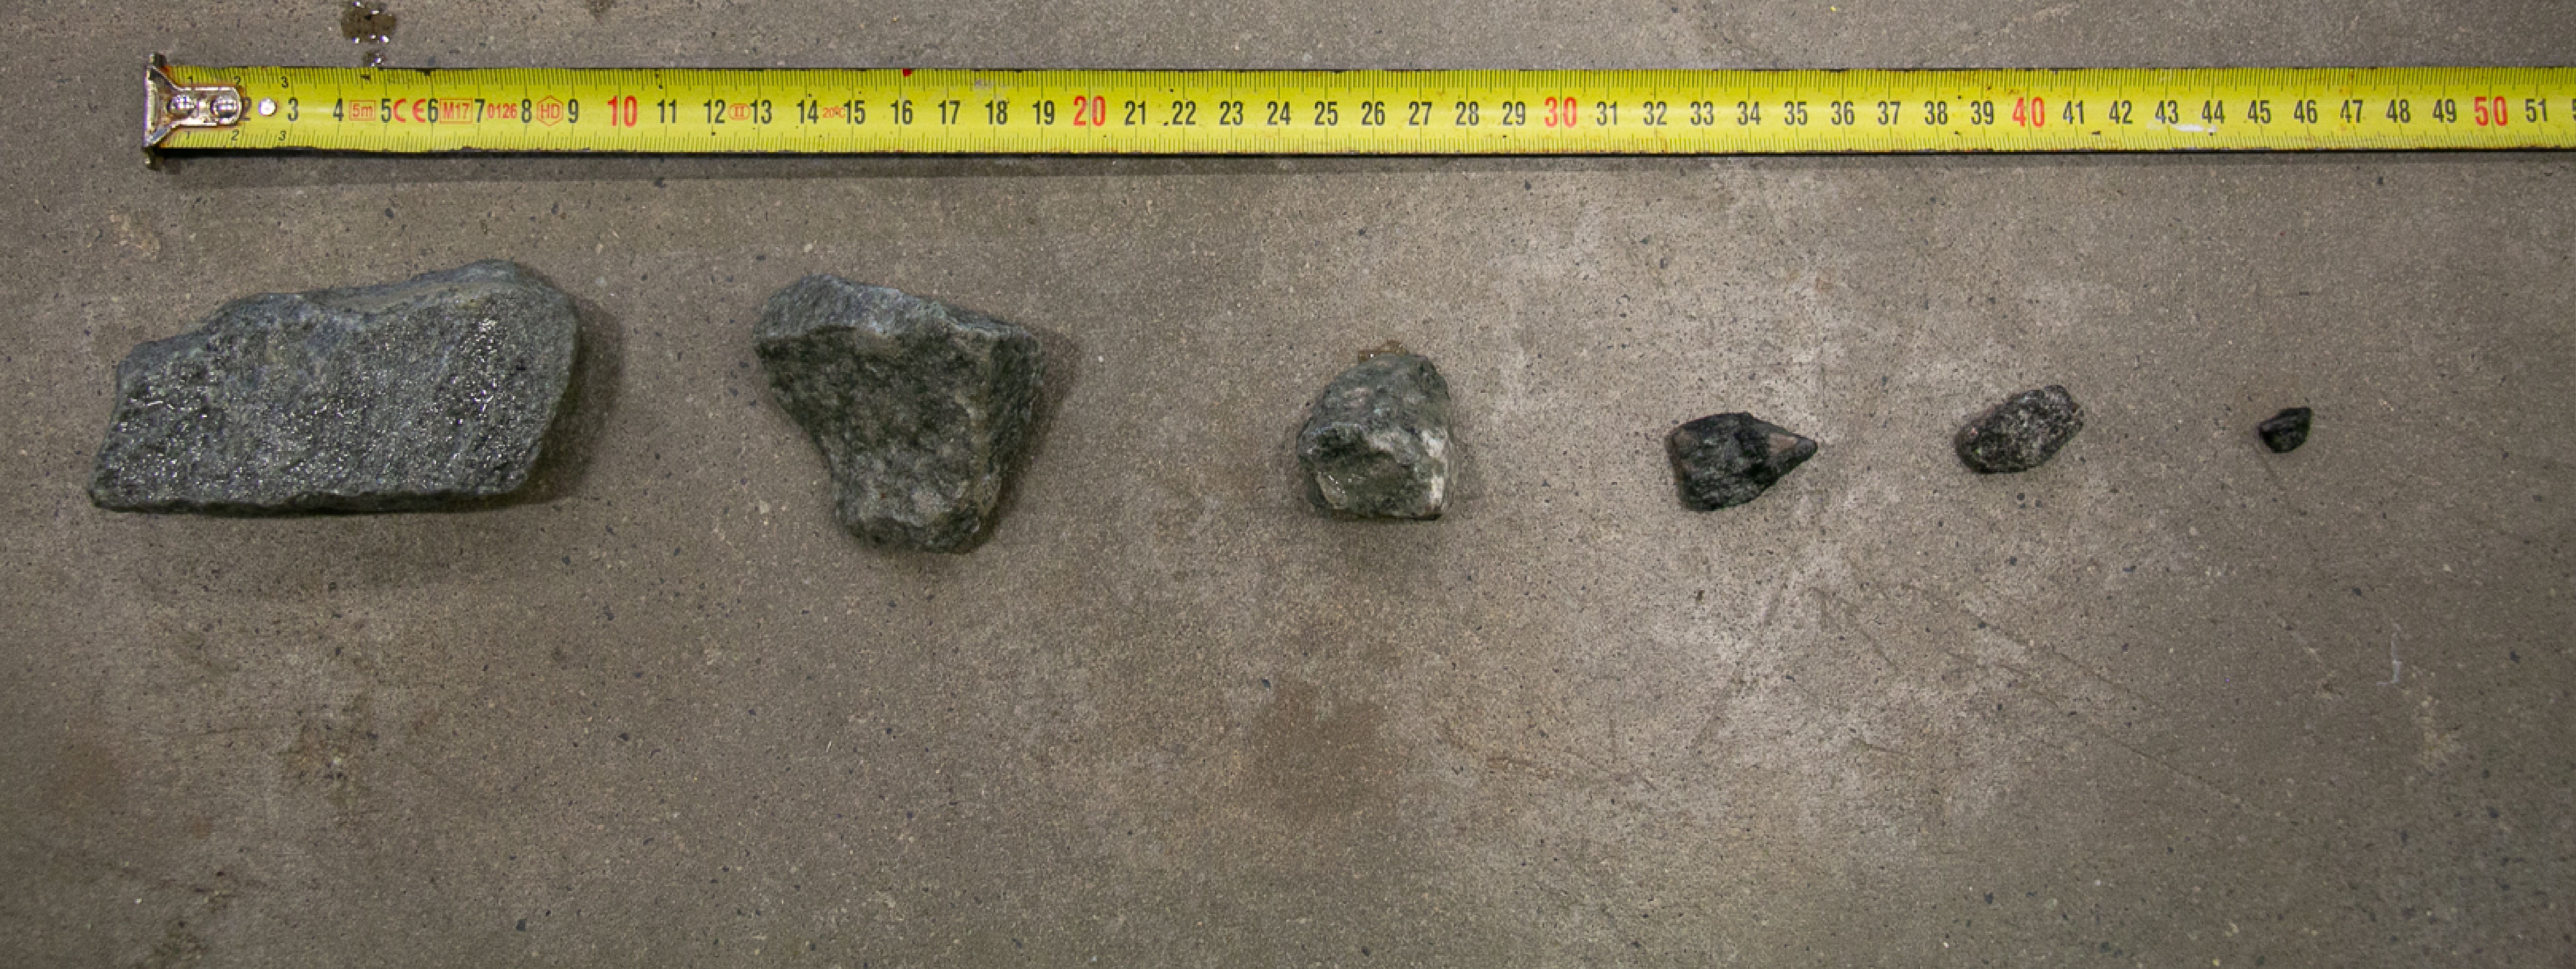 Different sizes of scaled stones used in the tests